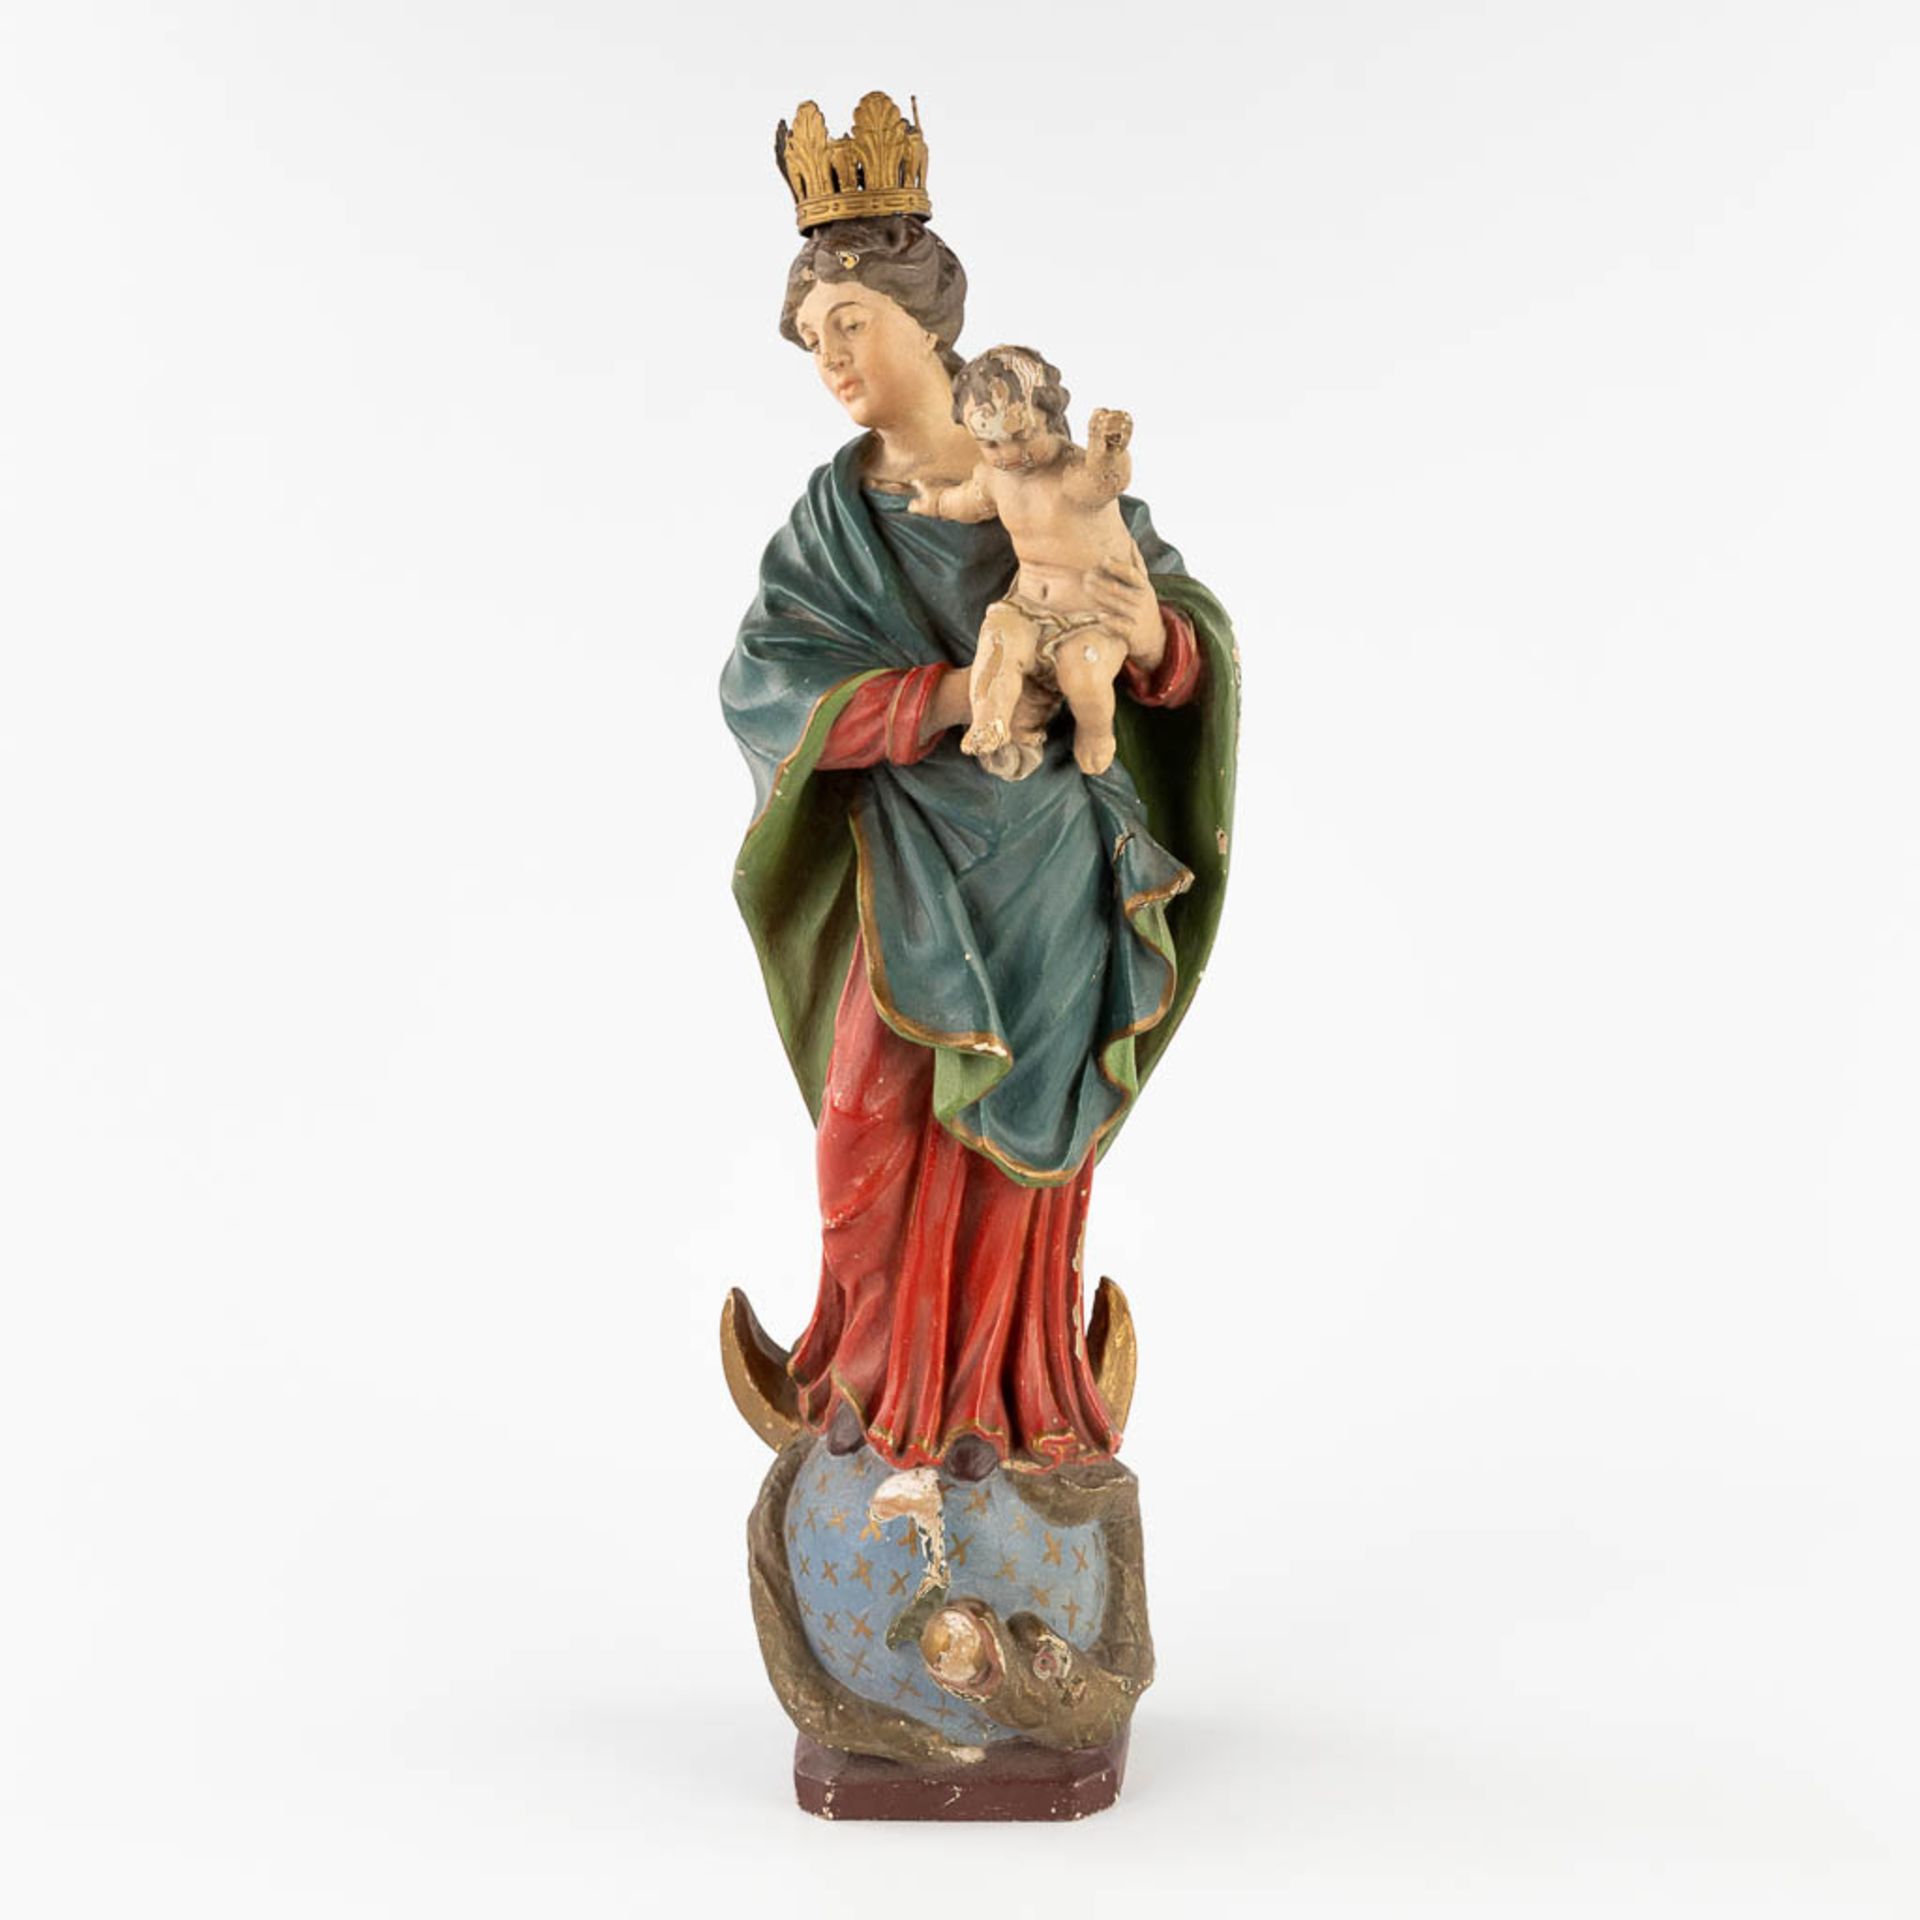 Madonna with Child standing on a Crescent moon and Serpent, wood sculpture, 19th C. (L:12 x W:16 x H